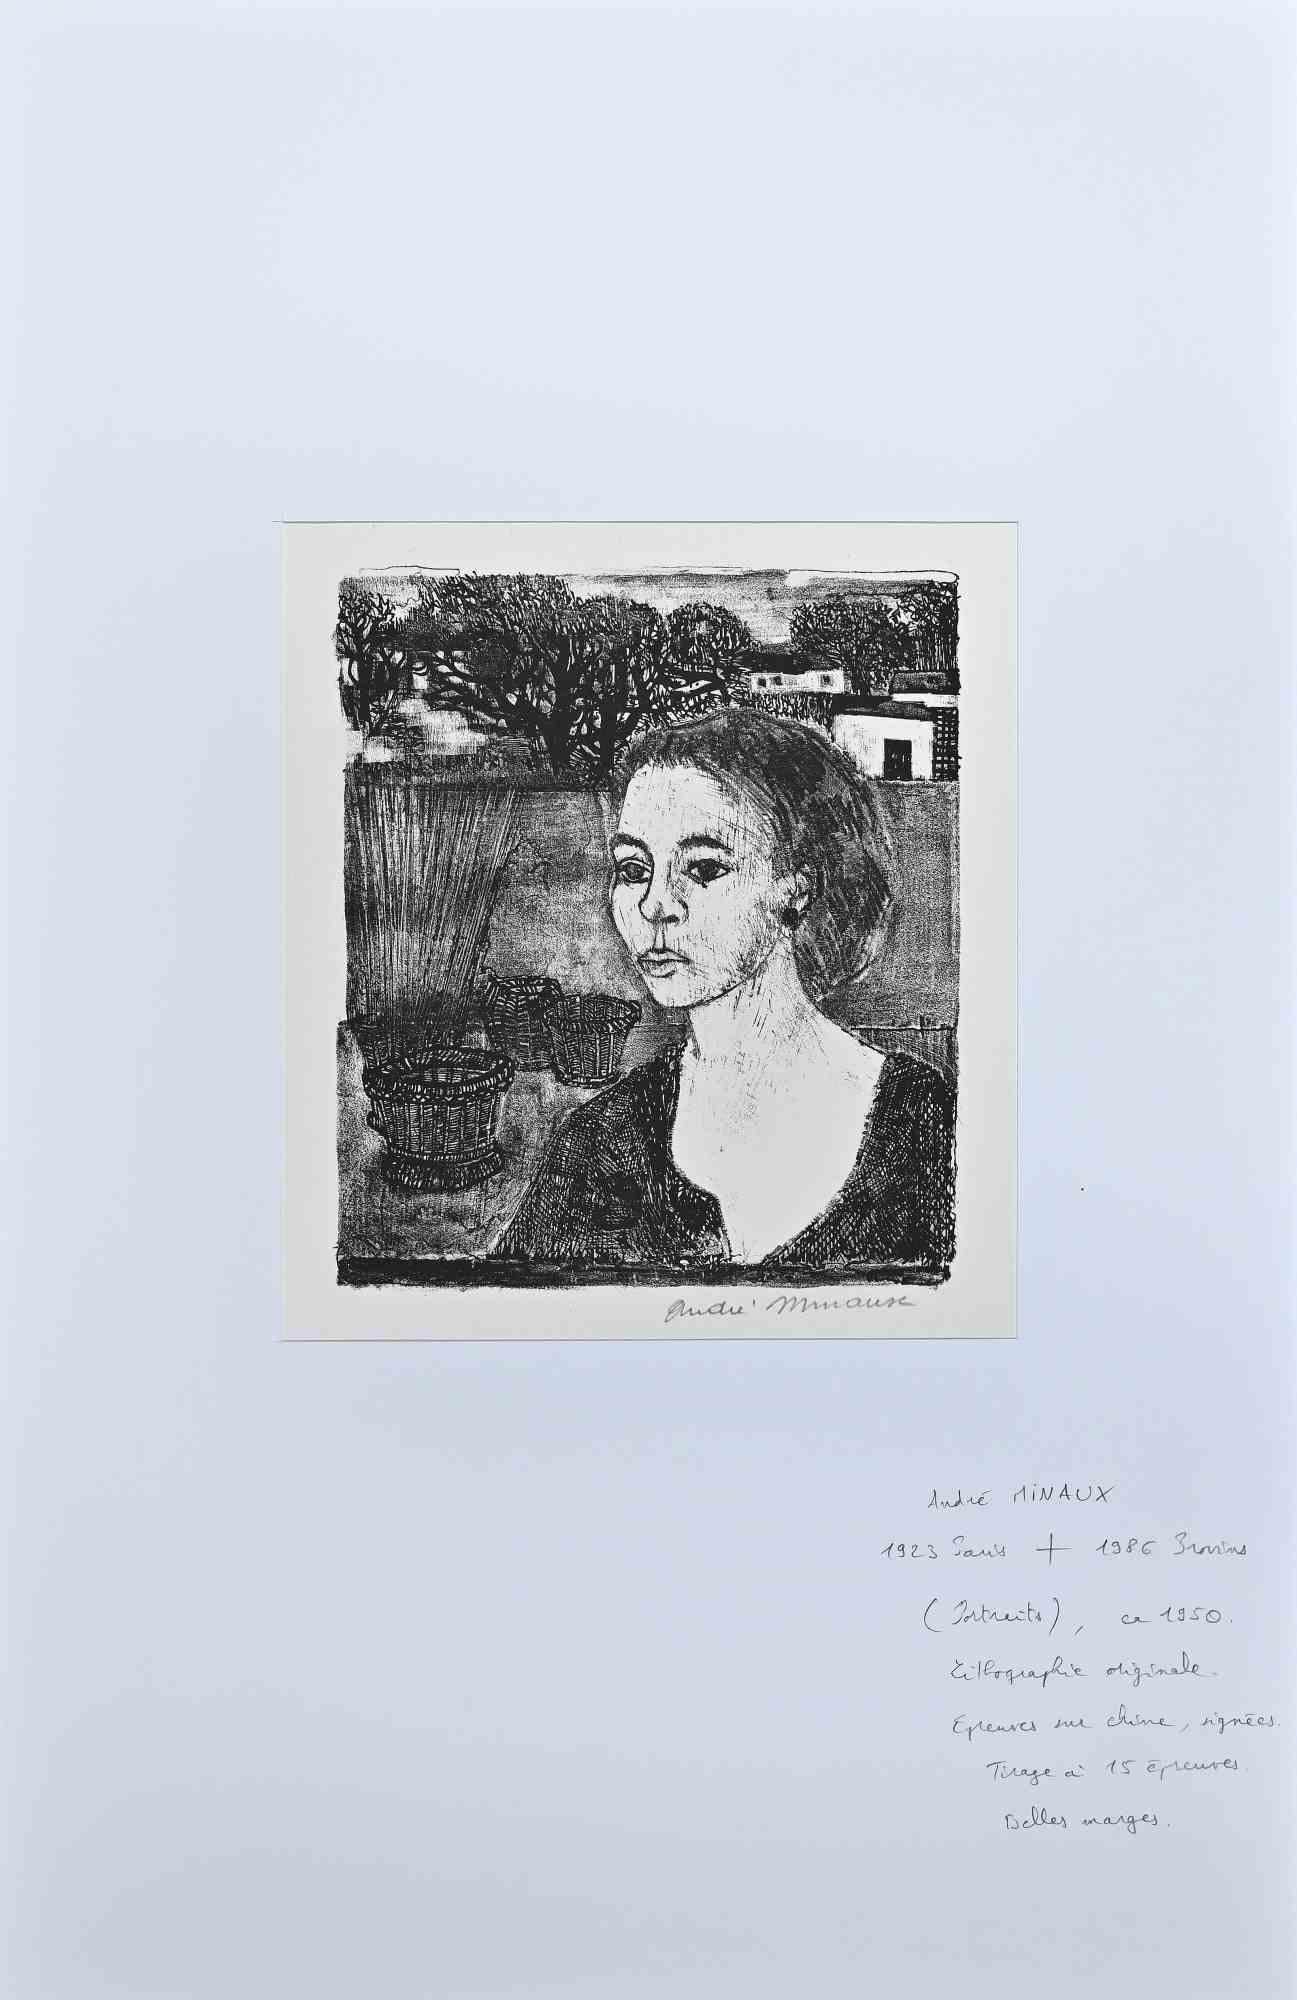 Portrait - Original Lithograph by Andre Minaux - Mid-20th Century - Print by André Minaux